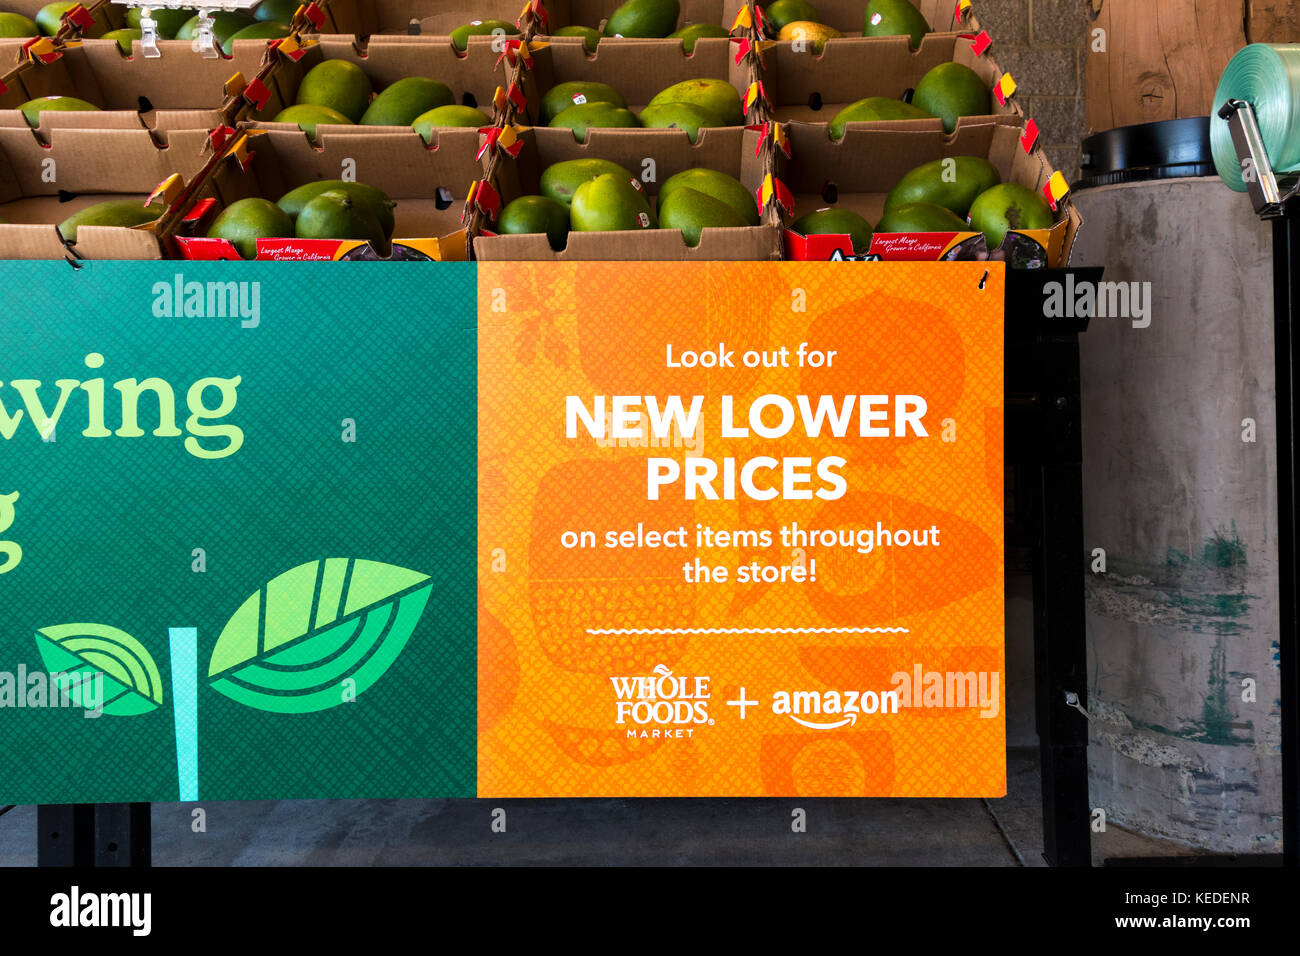 Amazon und Whole Foods in Cupertino Whole Foods store Stockfoto